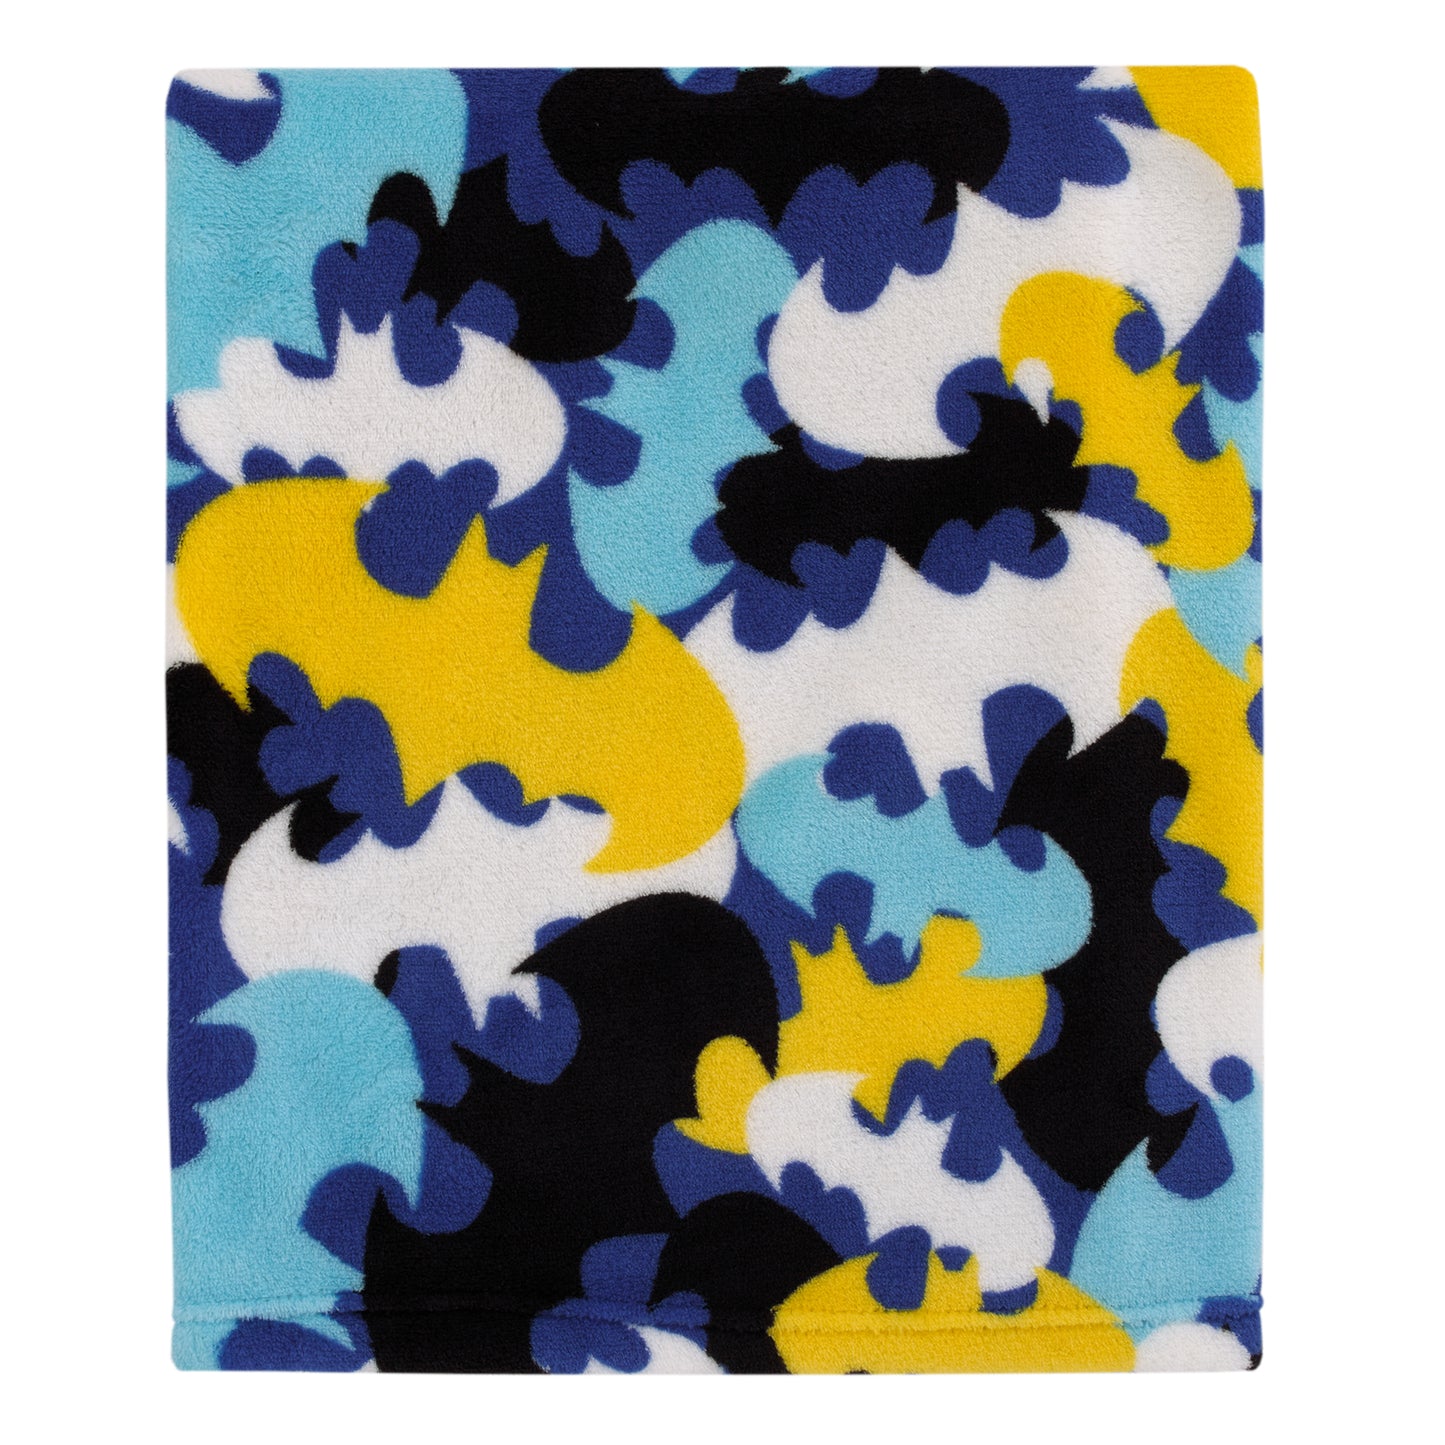 Warner Brothers Batman The Caped Crusader Light Blue, Navy, Yellow and White Bat-Signal Super Soft Toddler Blanket